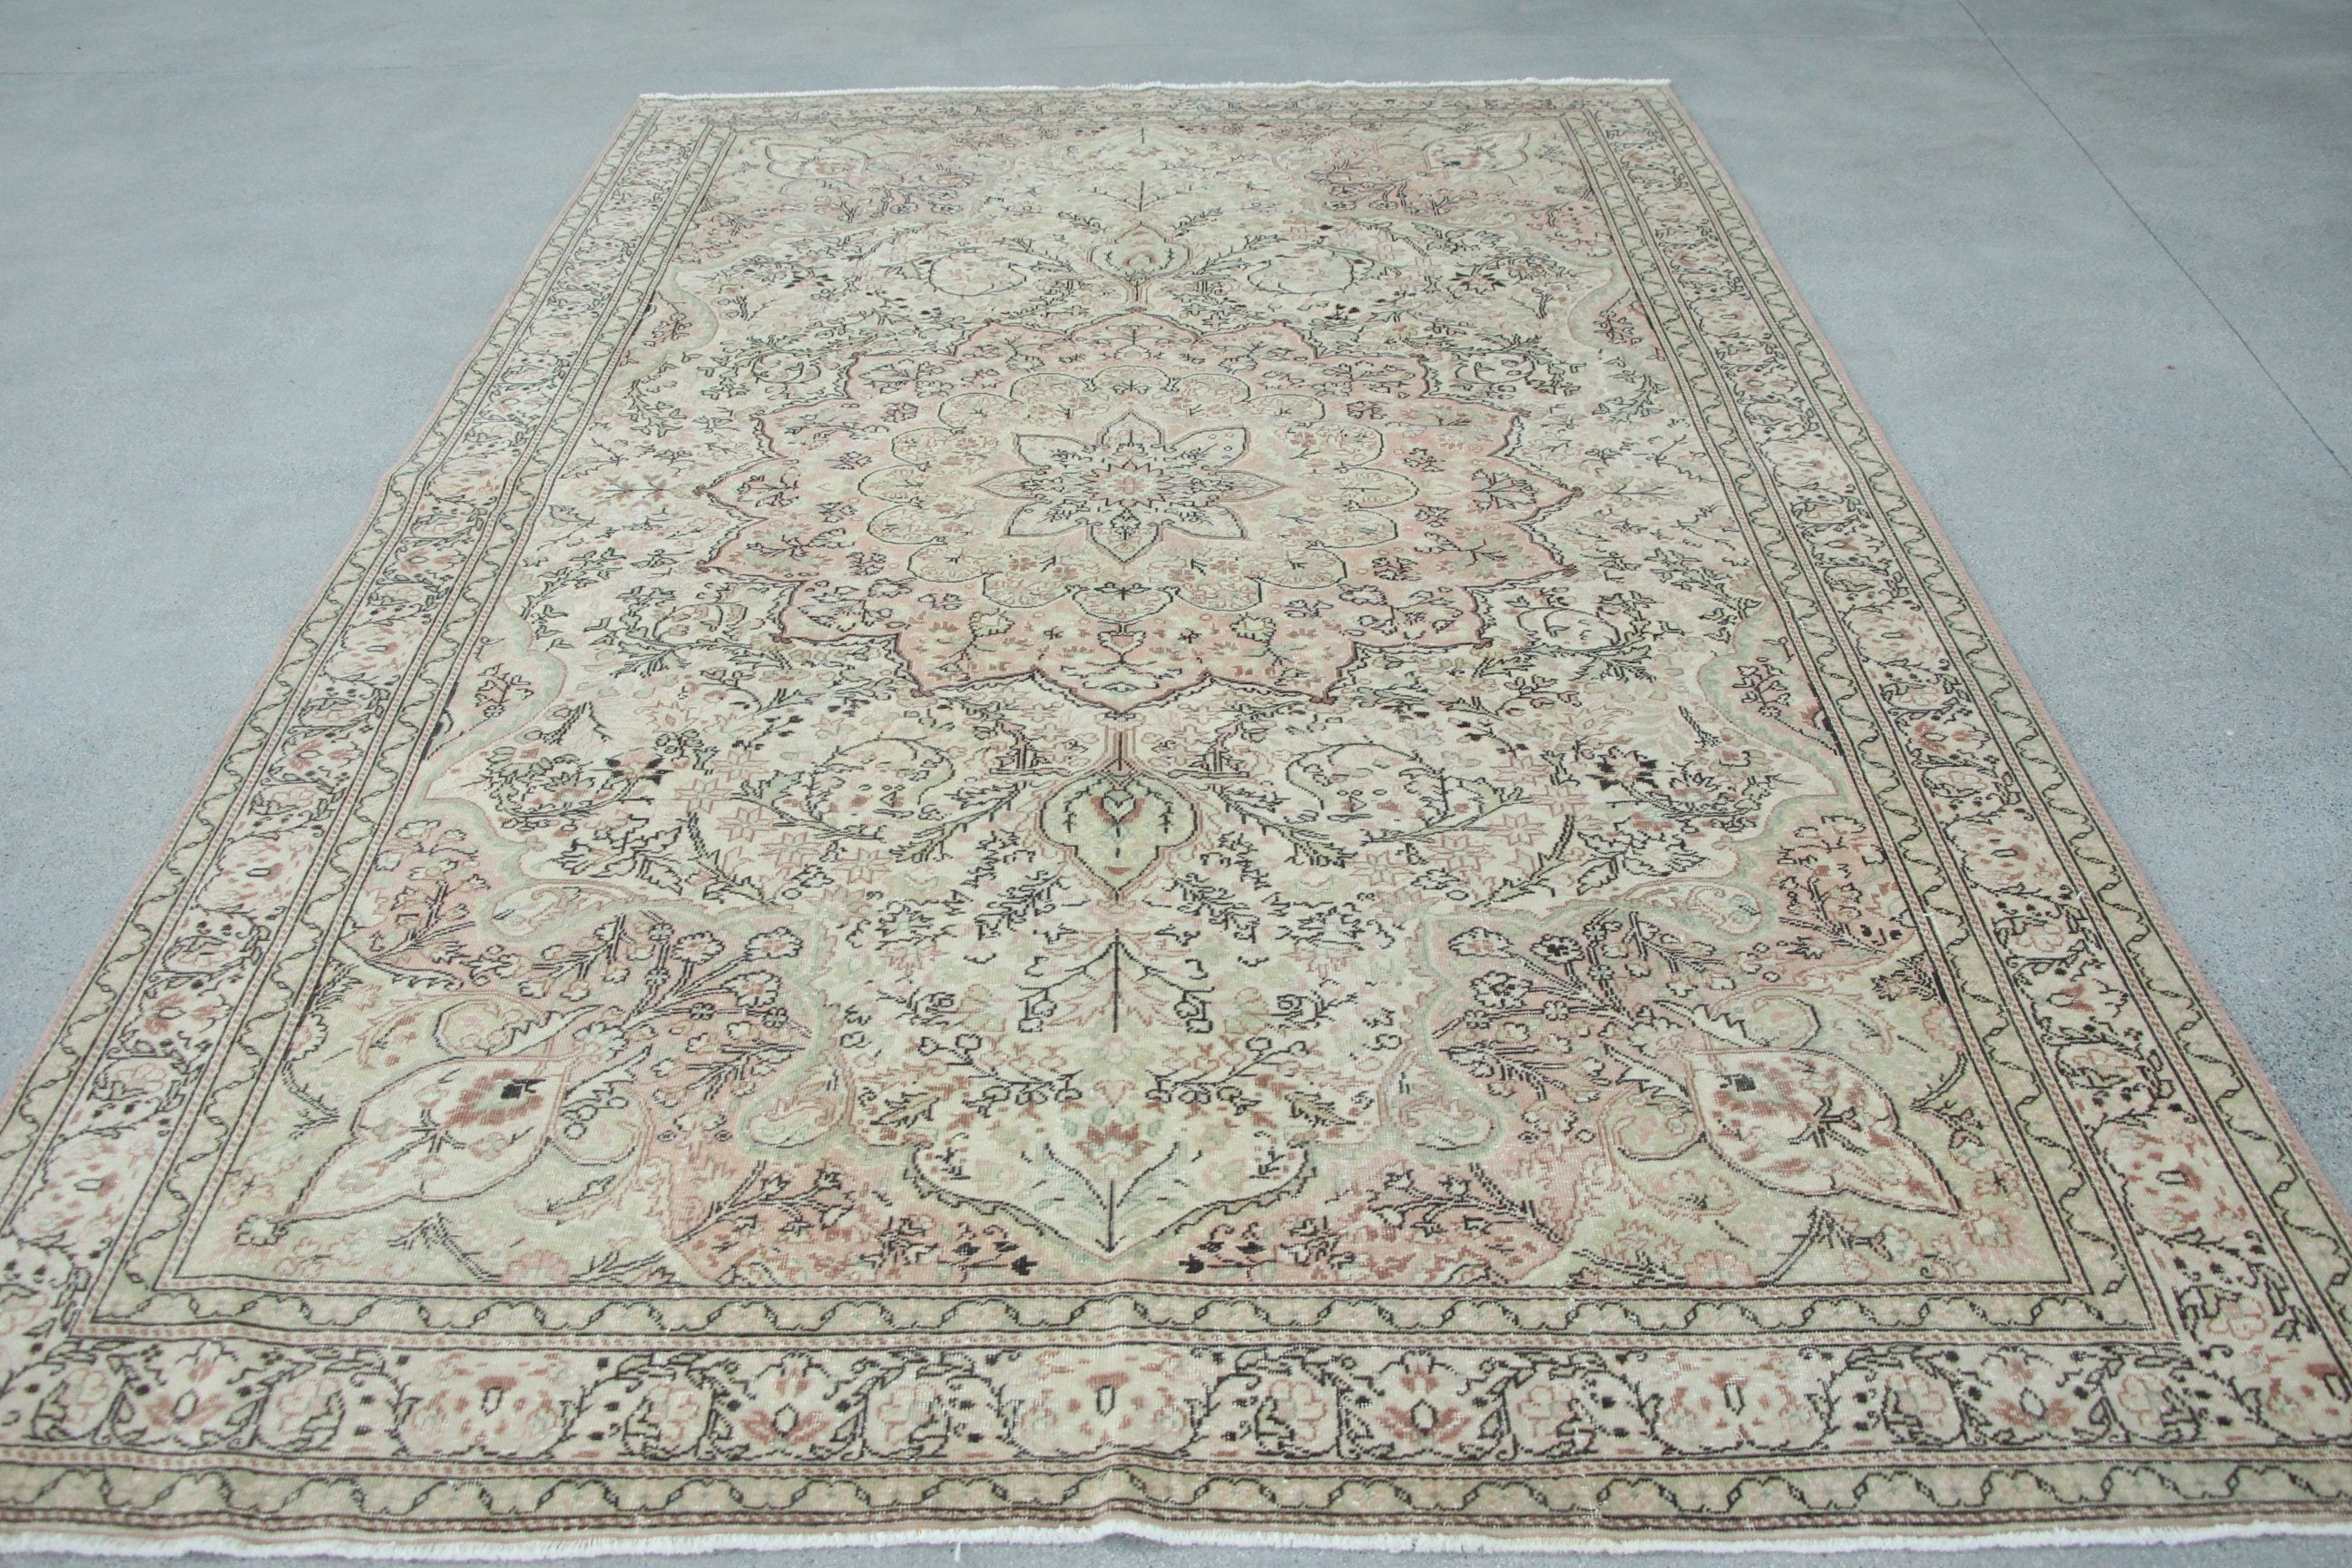 Turkish Rugs, Kitchen Rug, Dining Room Rugs, Salon Rugs, Green Oushak Rugs, Vintage Rug, 6.4x10.1 ft Large Rug, Pale Rugs